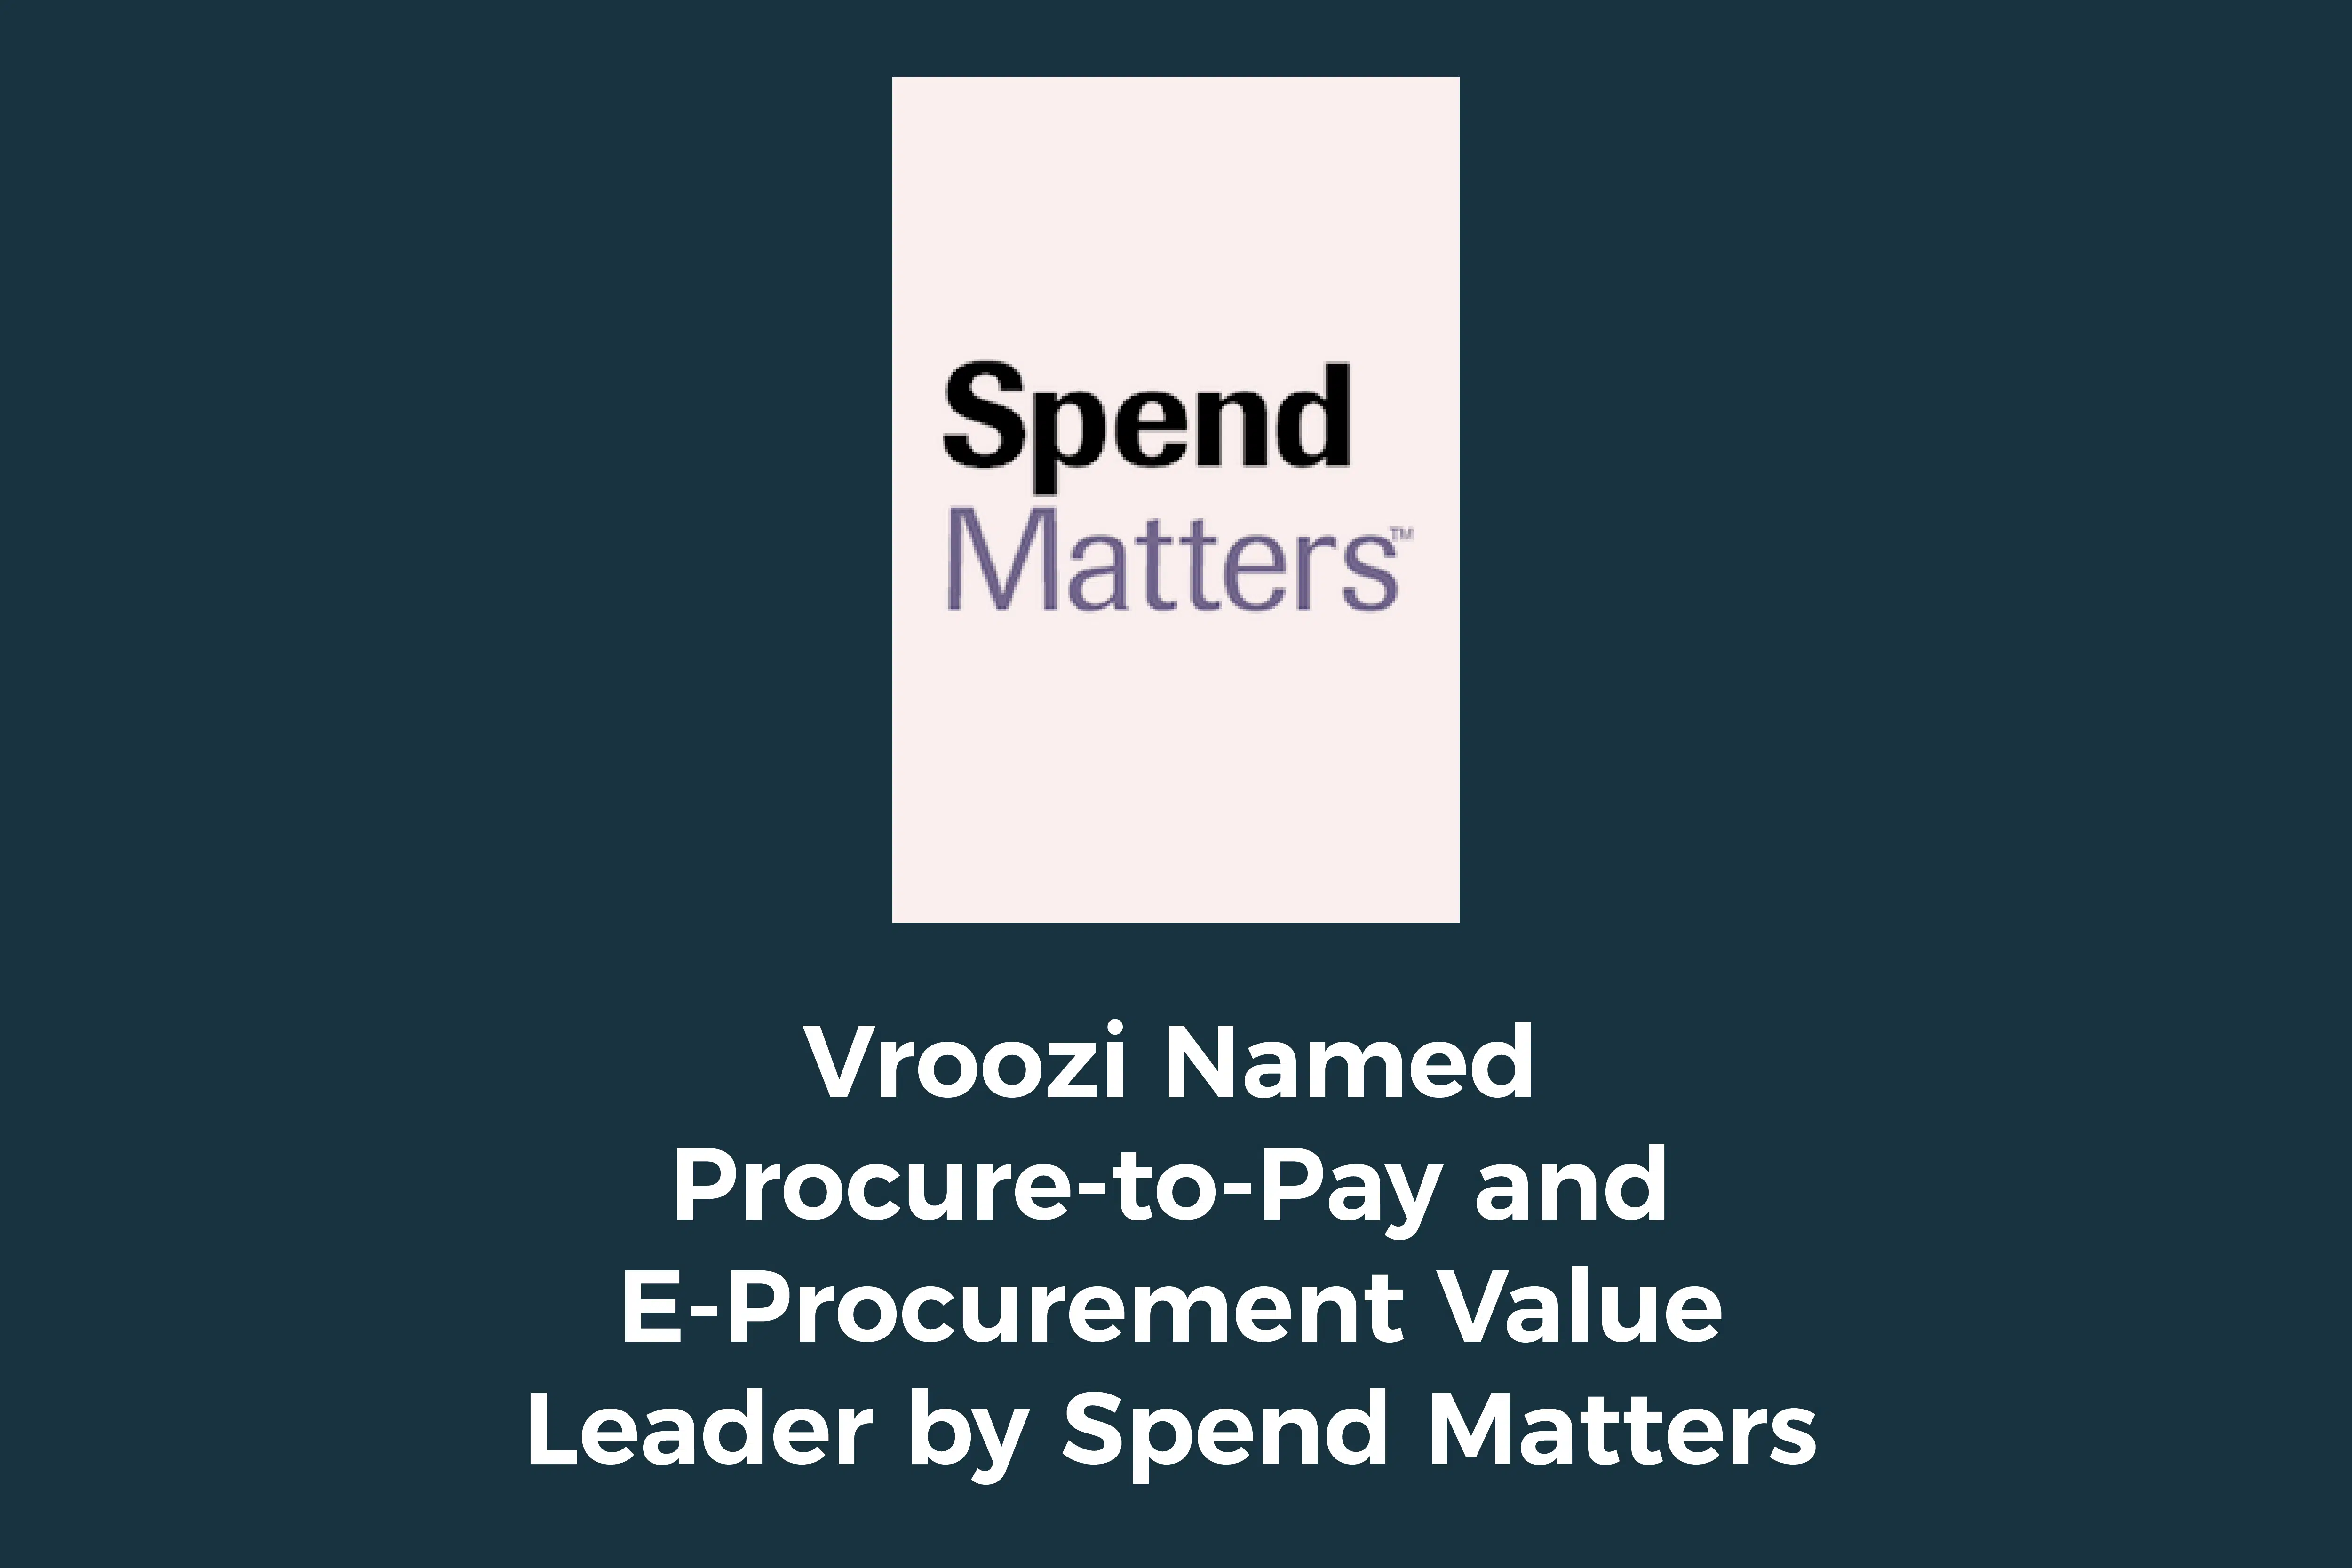 Vroozi procure-to-pay and eProcurement named value leader.